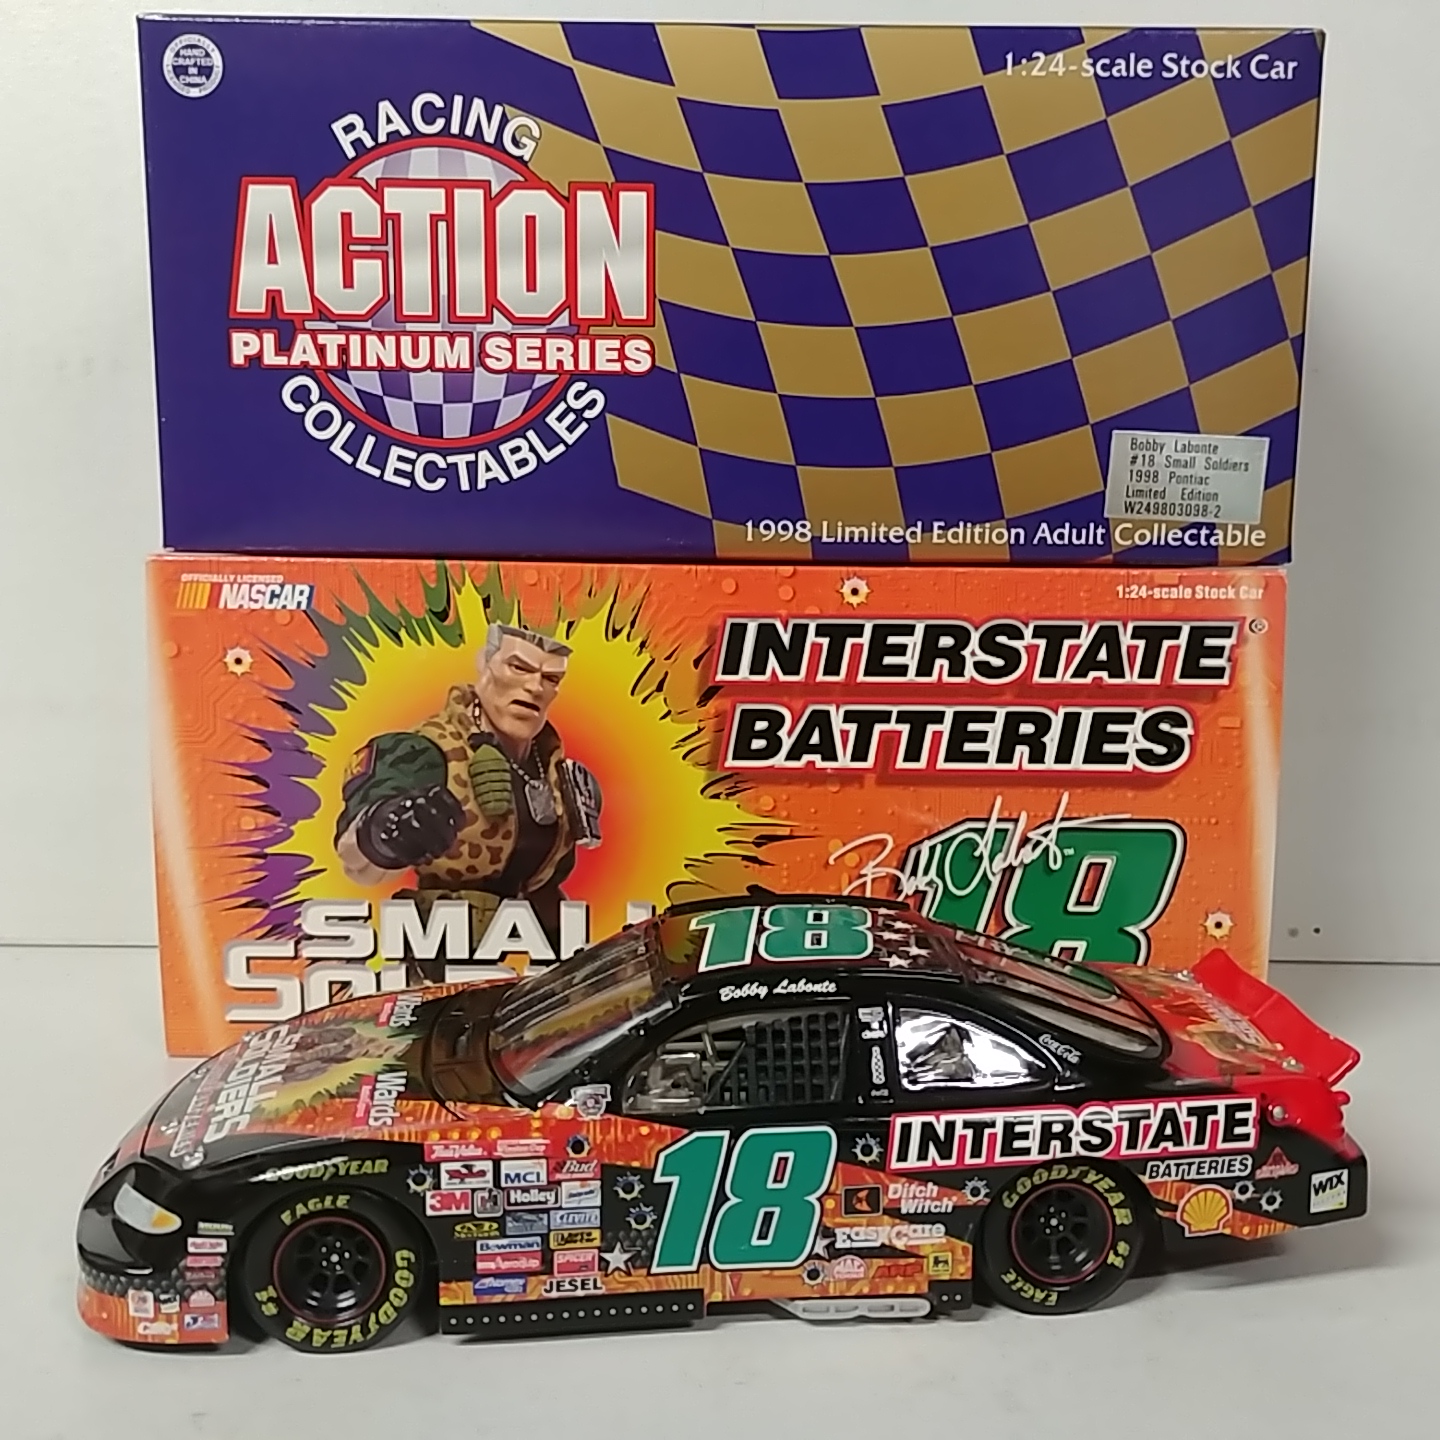 1998 Bobby Labonte 1/24th Interstate Batteries "Small Soldiers" c/w Pontiac